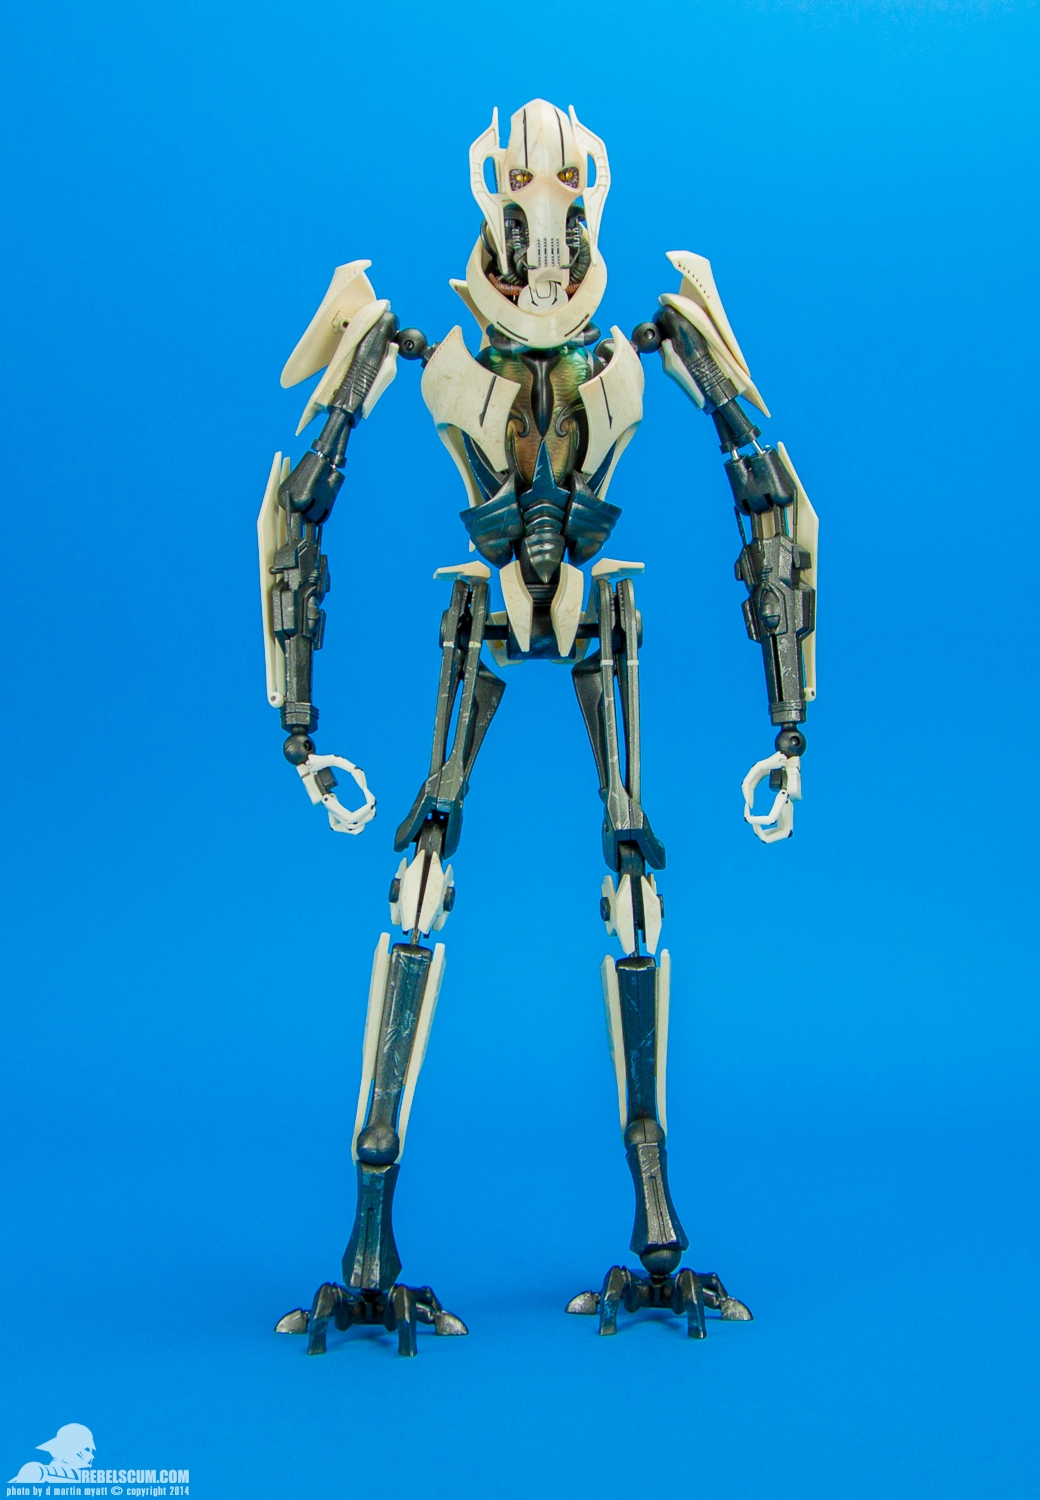 General-Grievous-Sixth-Scale-Figure-Sideshow-Collectibles-001.jpg